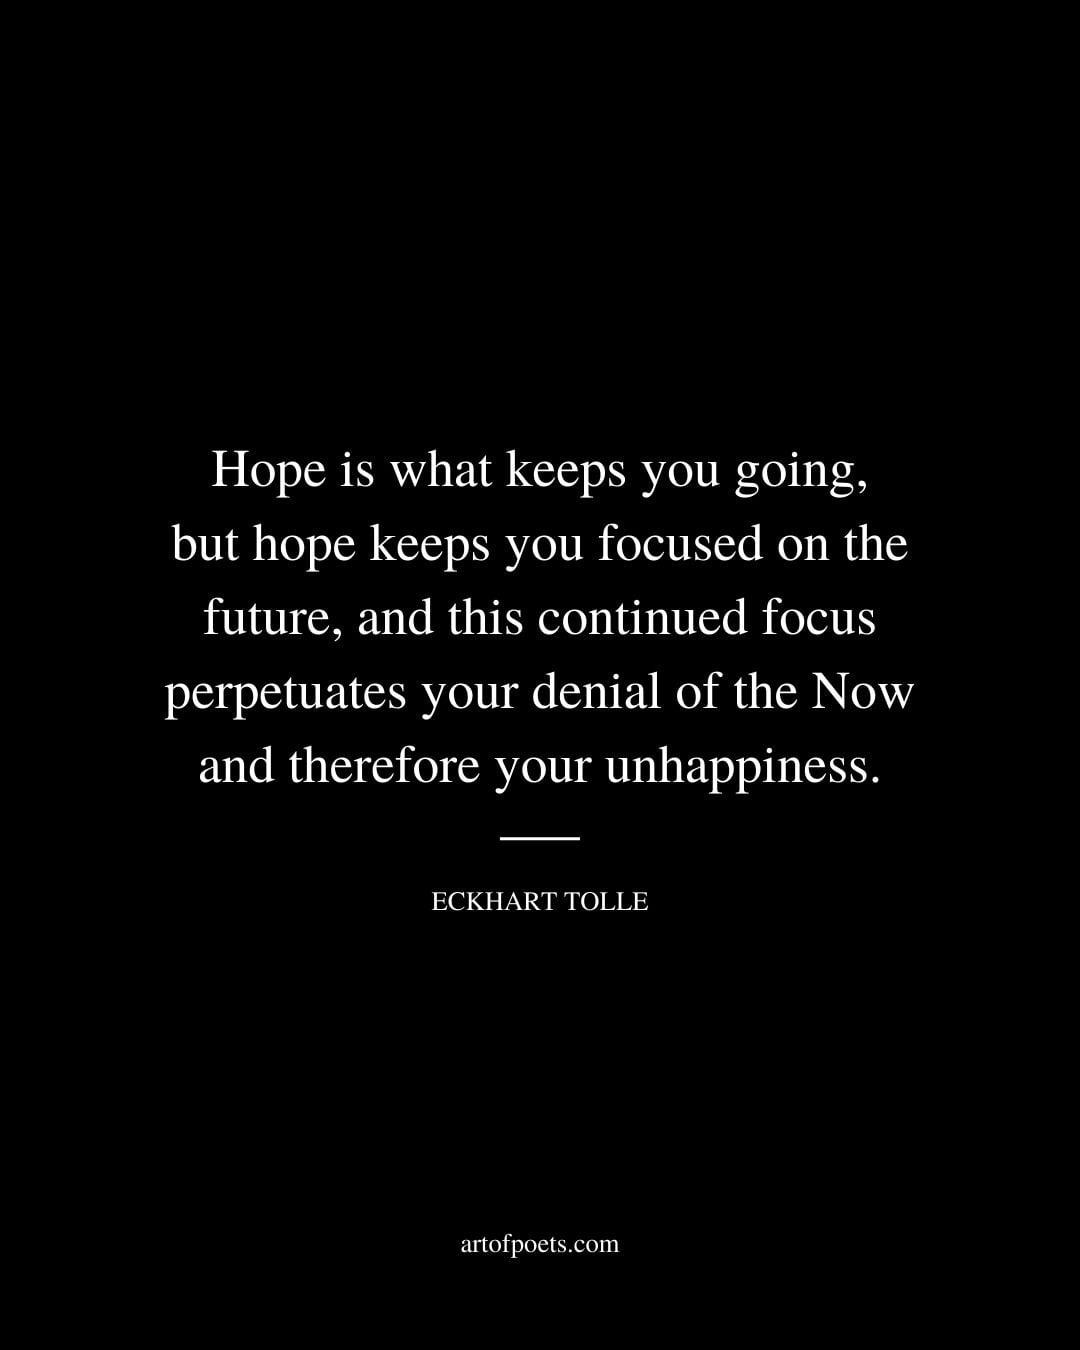 Hope is what keeps you going but hope keeps you focused on the future